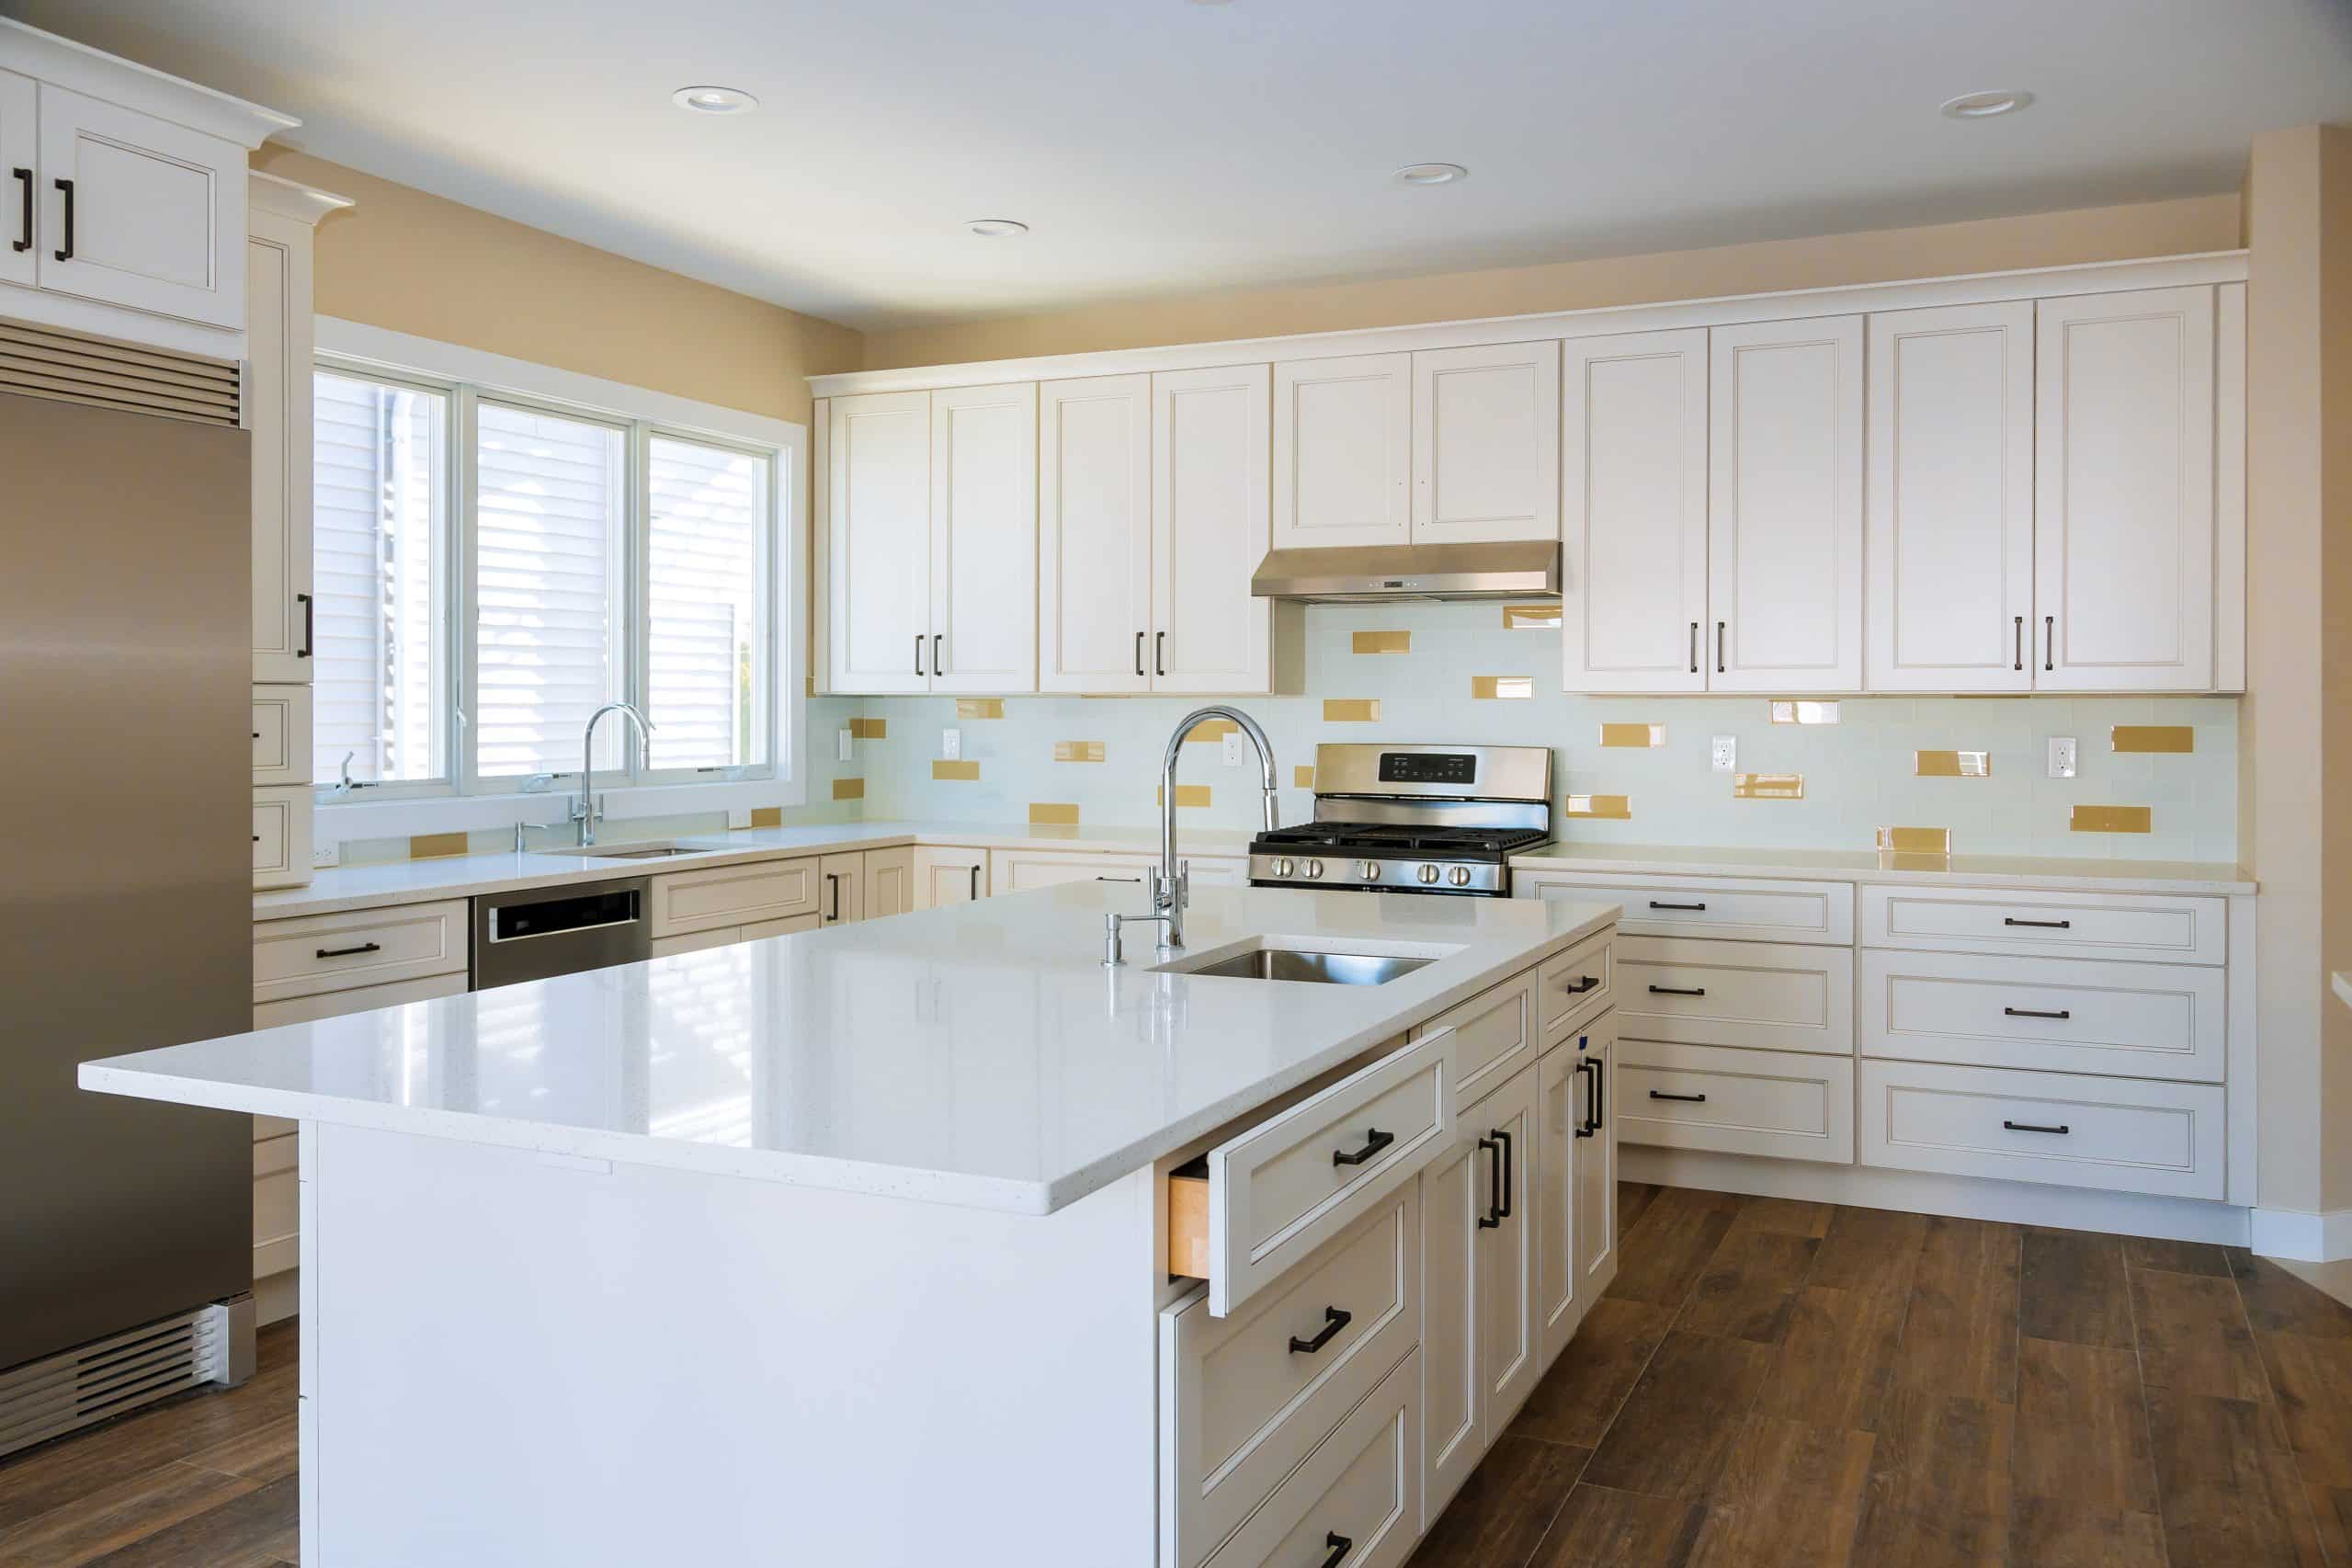 Installing cabinets and counter top in a white kitchen partially installed furniture.